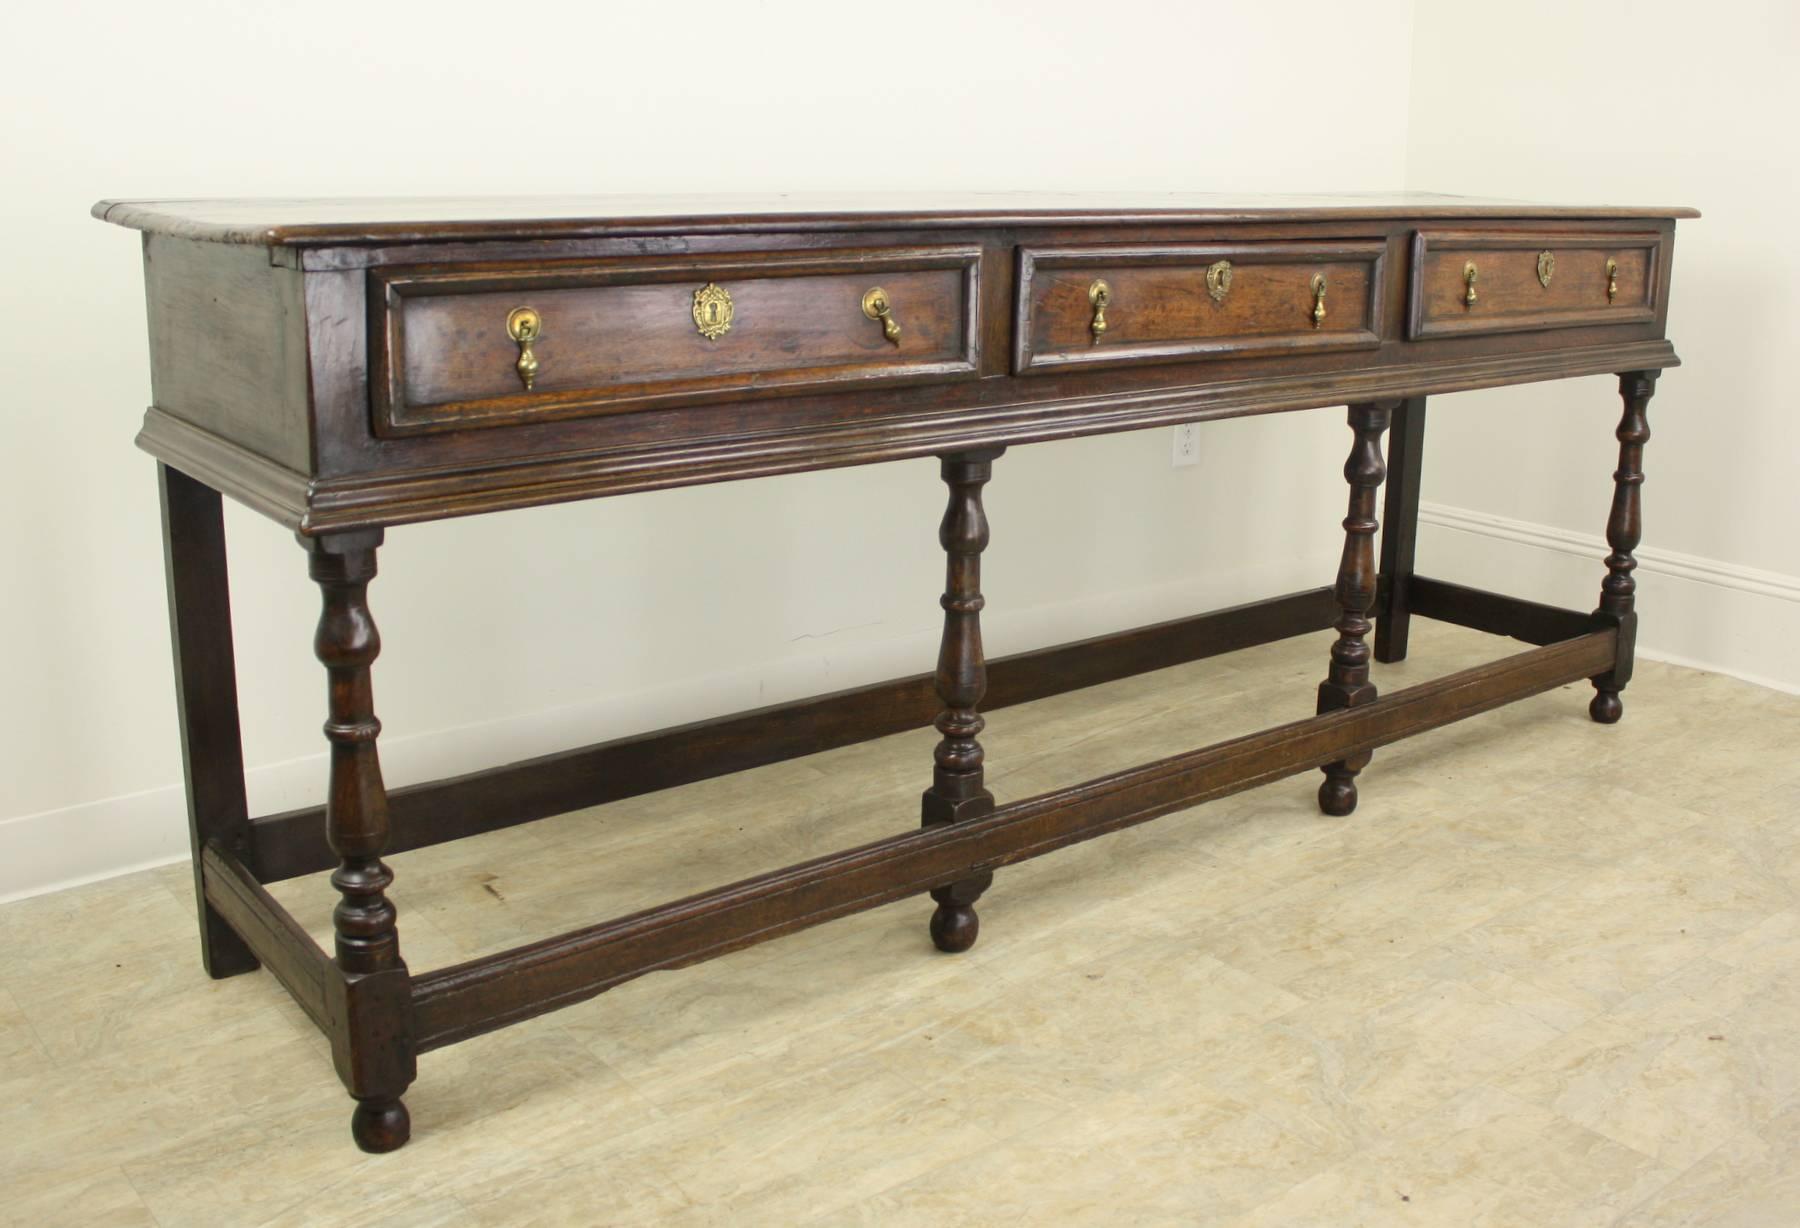 With fine strong moldings around the top and bottom of the drawer section, and fine moldings around the drawer fronts, this console is an excellent example of  classic early Welsh period furniture. The legs are wonderfully turned, and the all-around